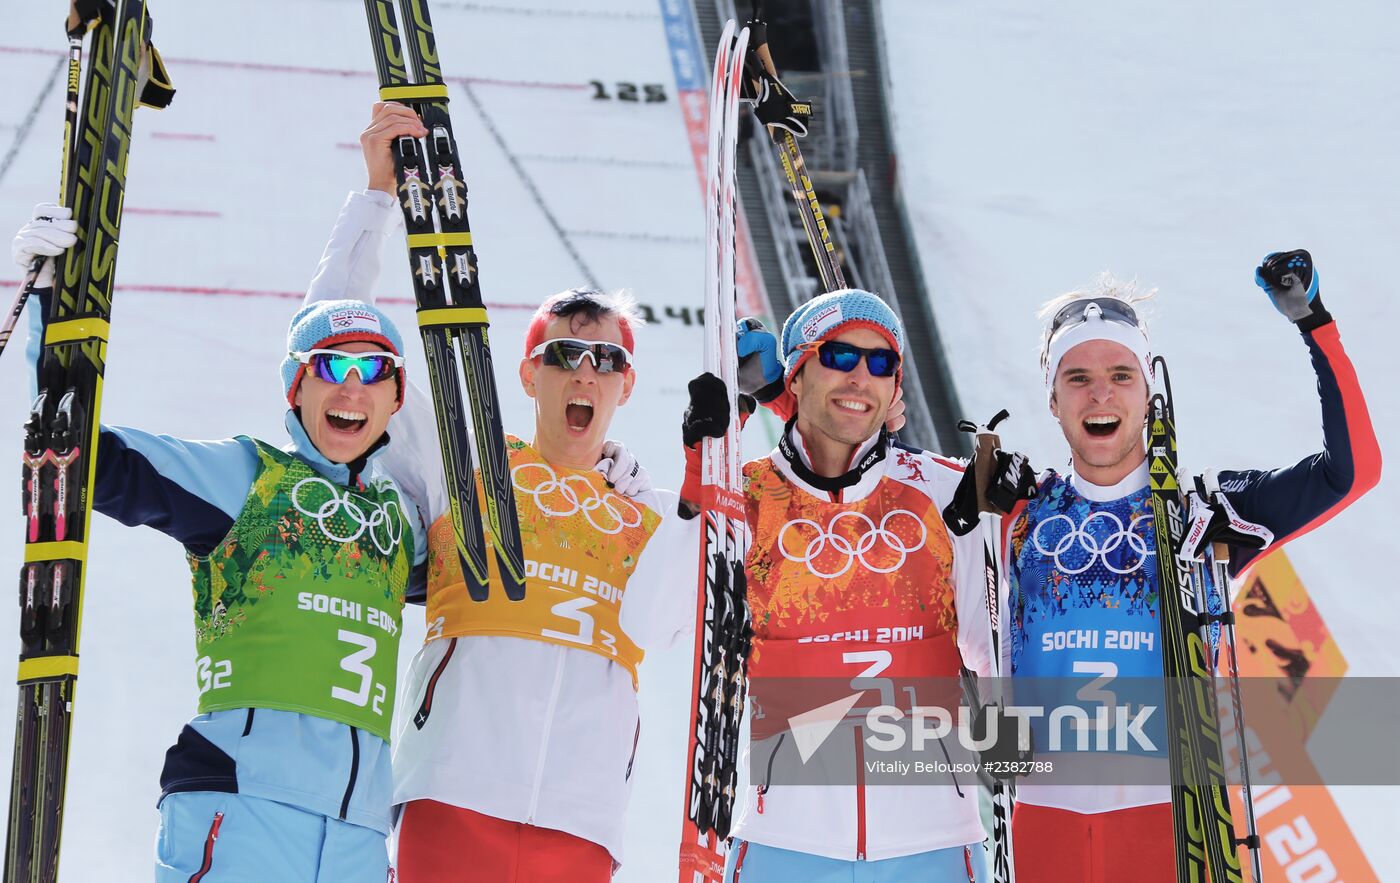 2014 Winter Olympics. Nordic combined. Team events